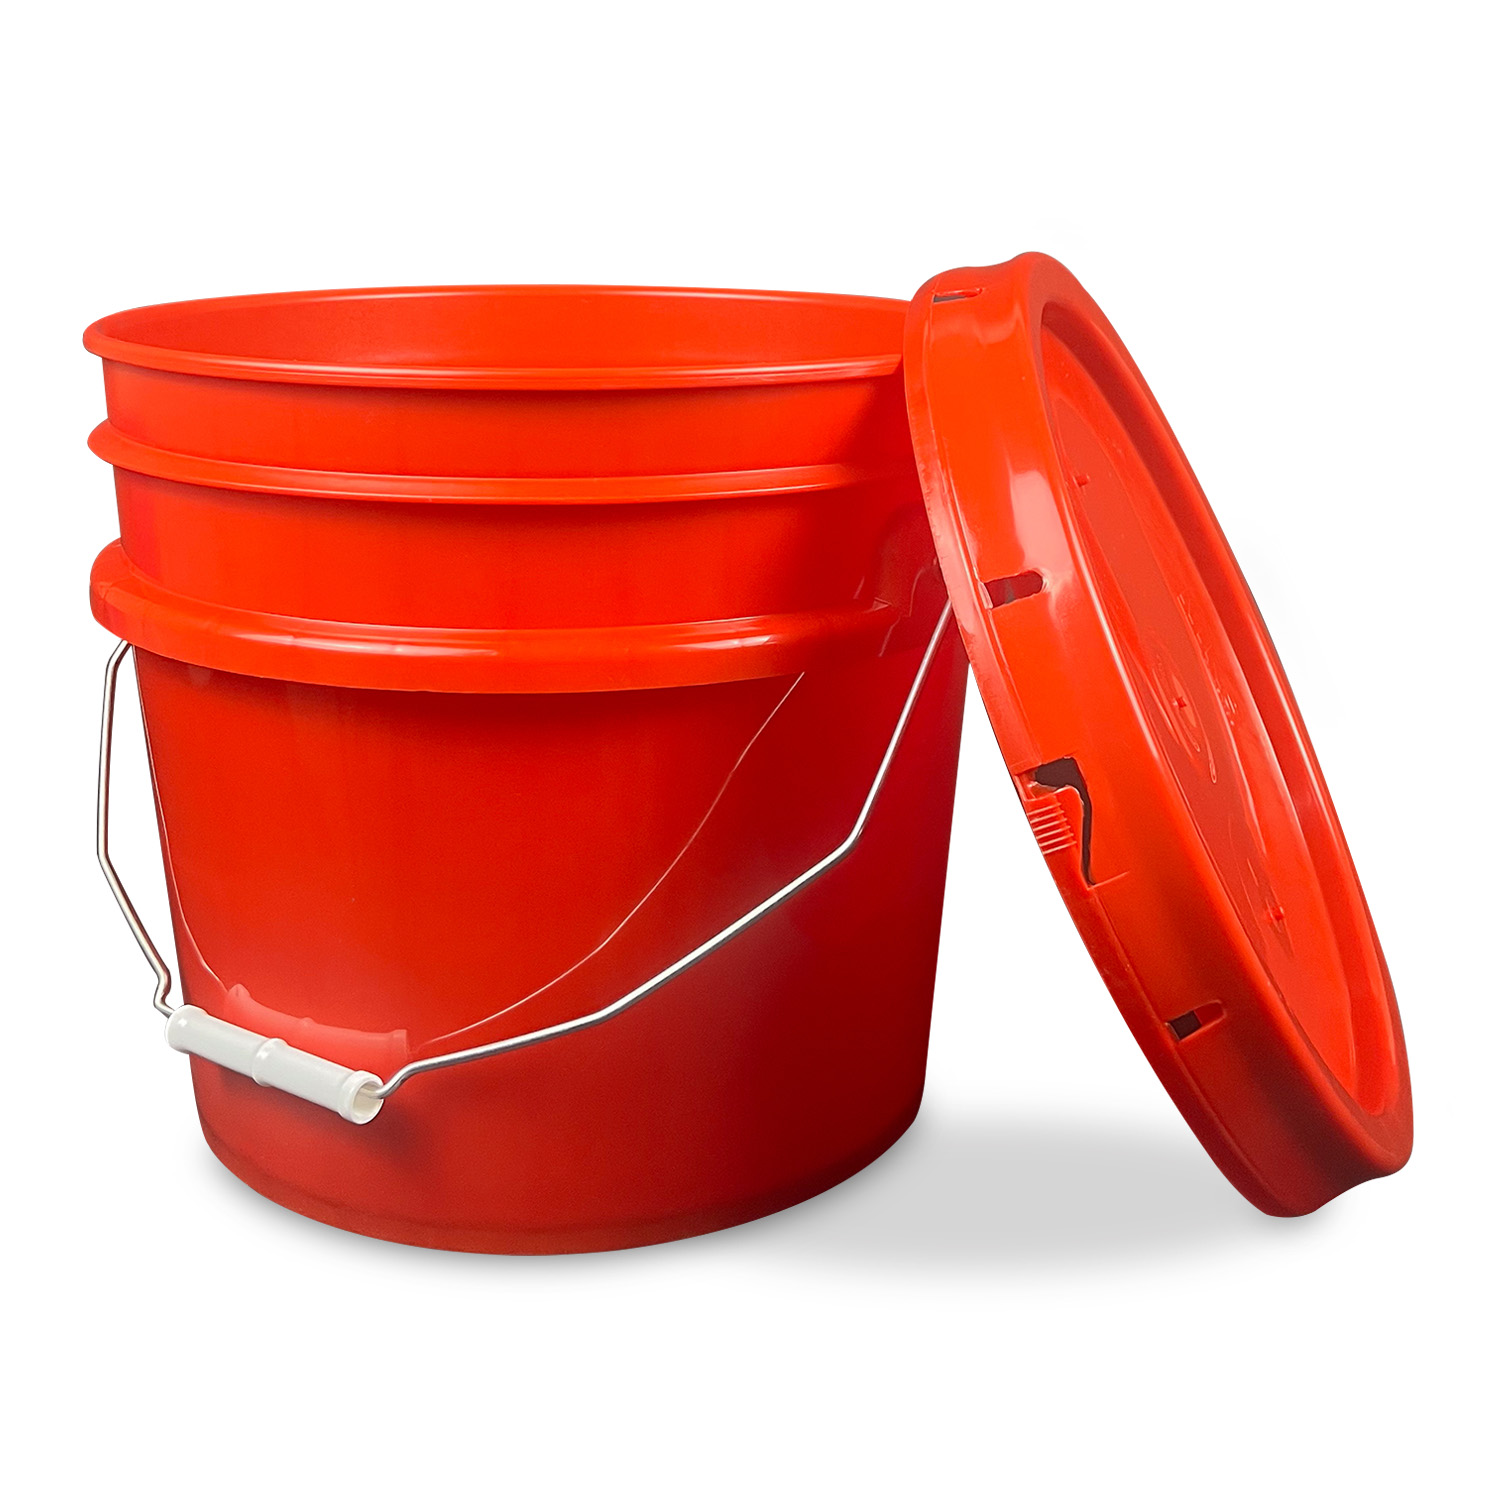 Green 5 Gallon Buckets and Flat Lids Food Grade Combo 6 Pack <Font  color=red> Special Combo Free Shipping</font>